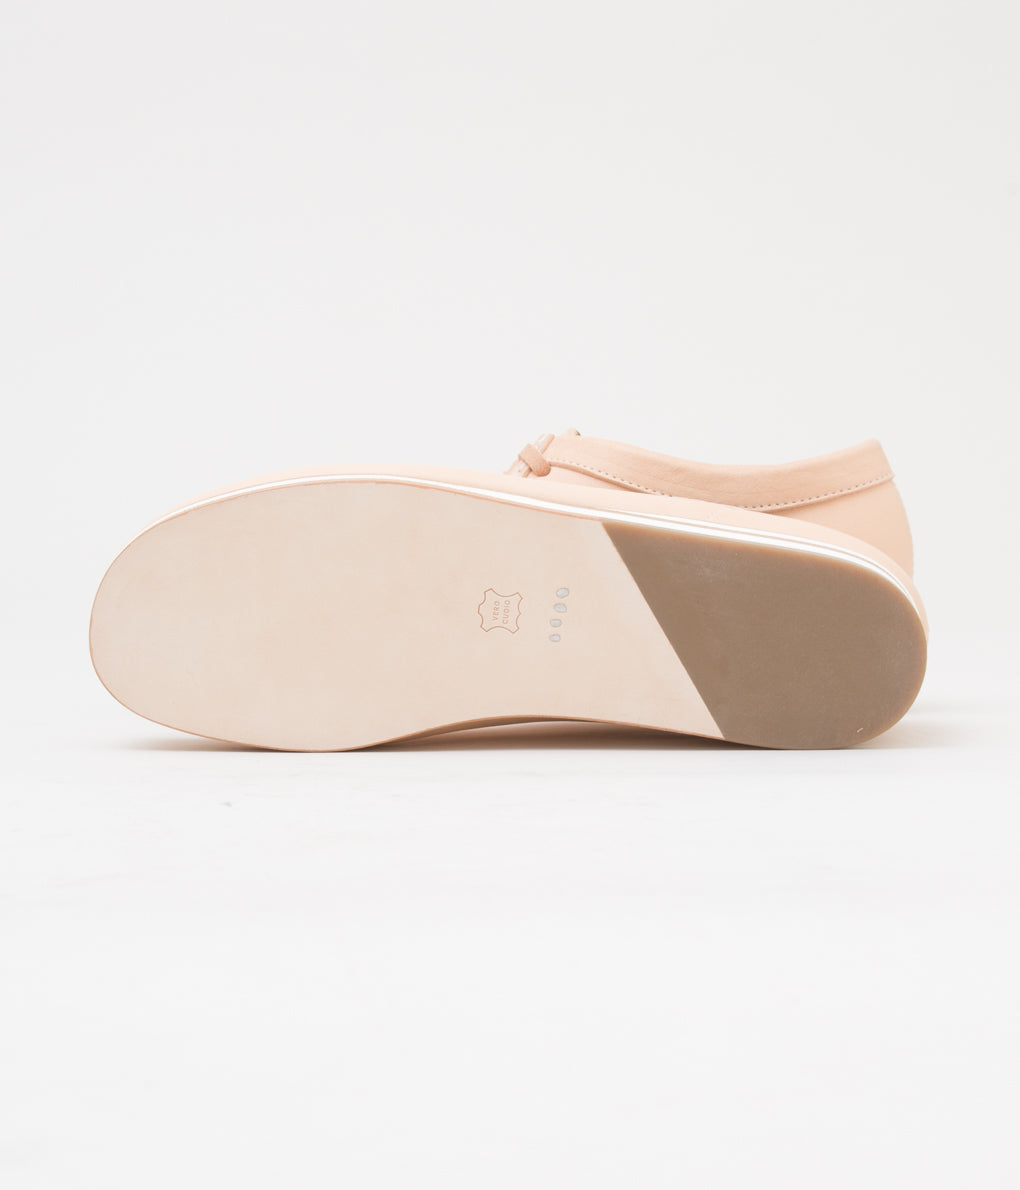 HENDER SCHEME "MANUAL INDUSTRIAL PRODUCTS 29"(NATURAL)